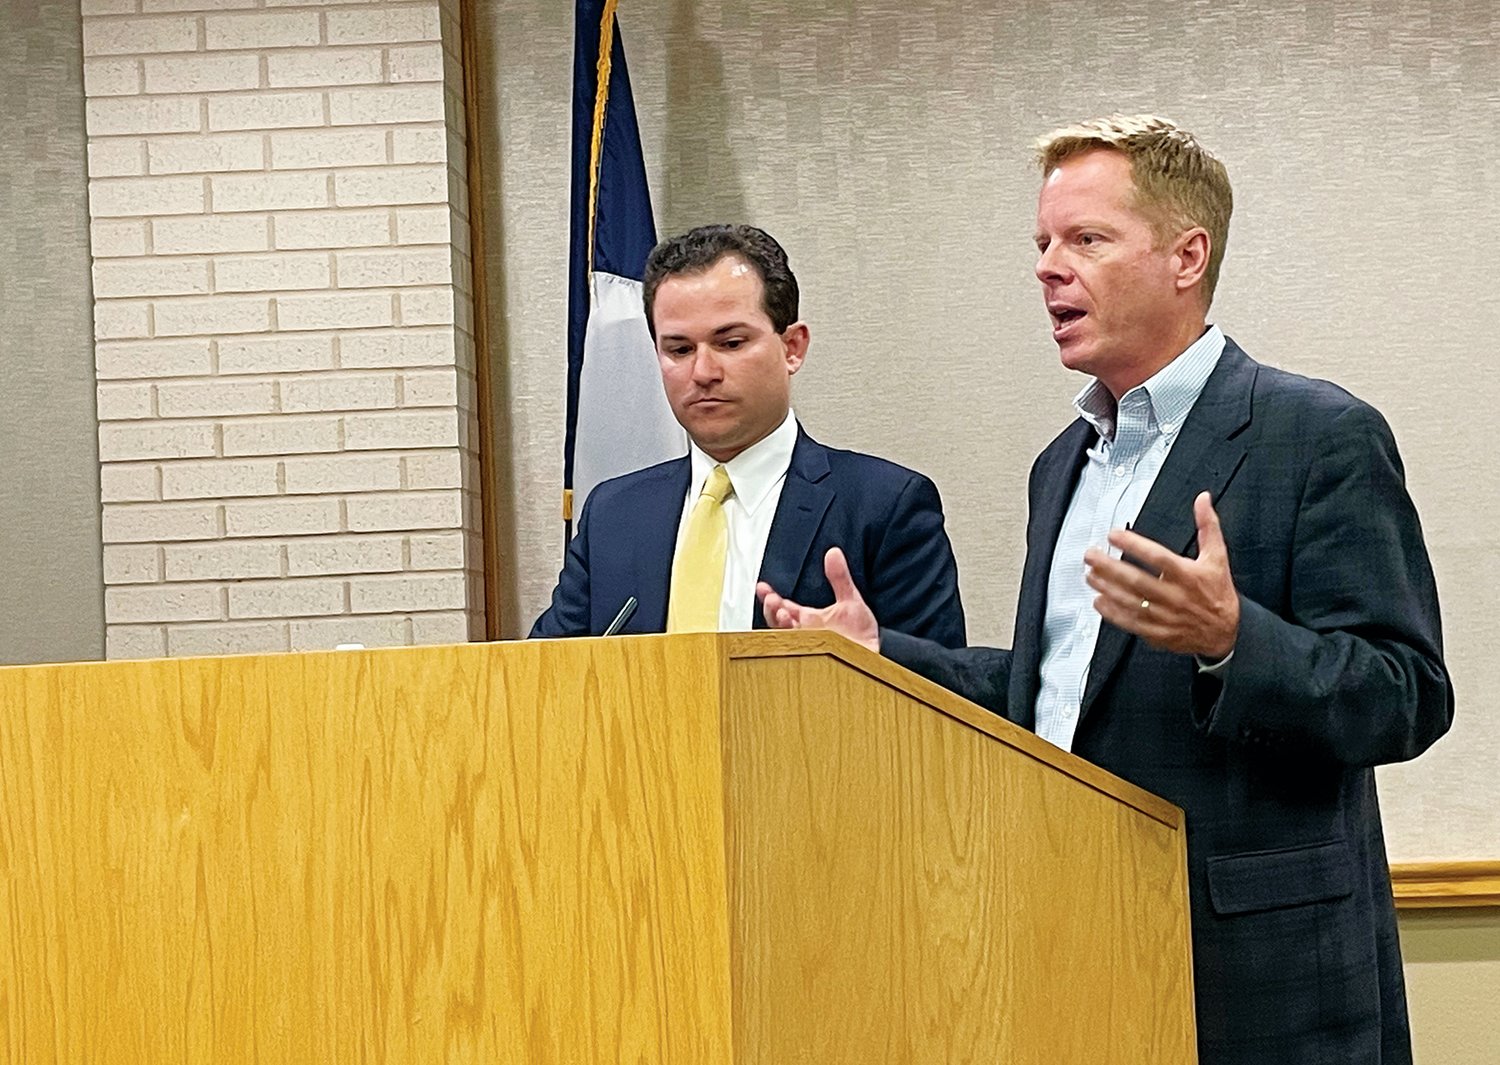 David MacNamara (left) and Ulrich Schmidt urged the school board to consider the application for "Project Redeemer," a possible $3.7 billion project that lies partially within the school district.